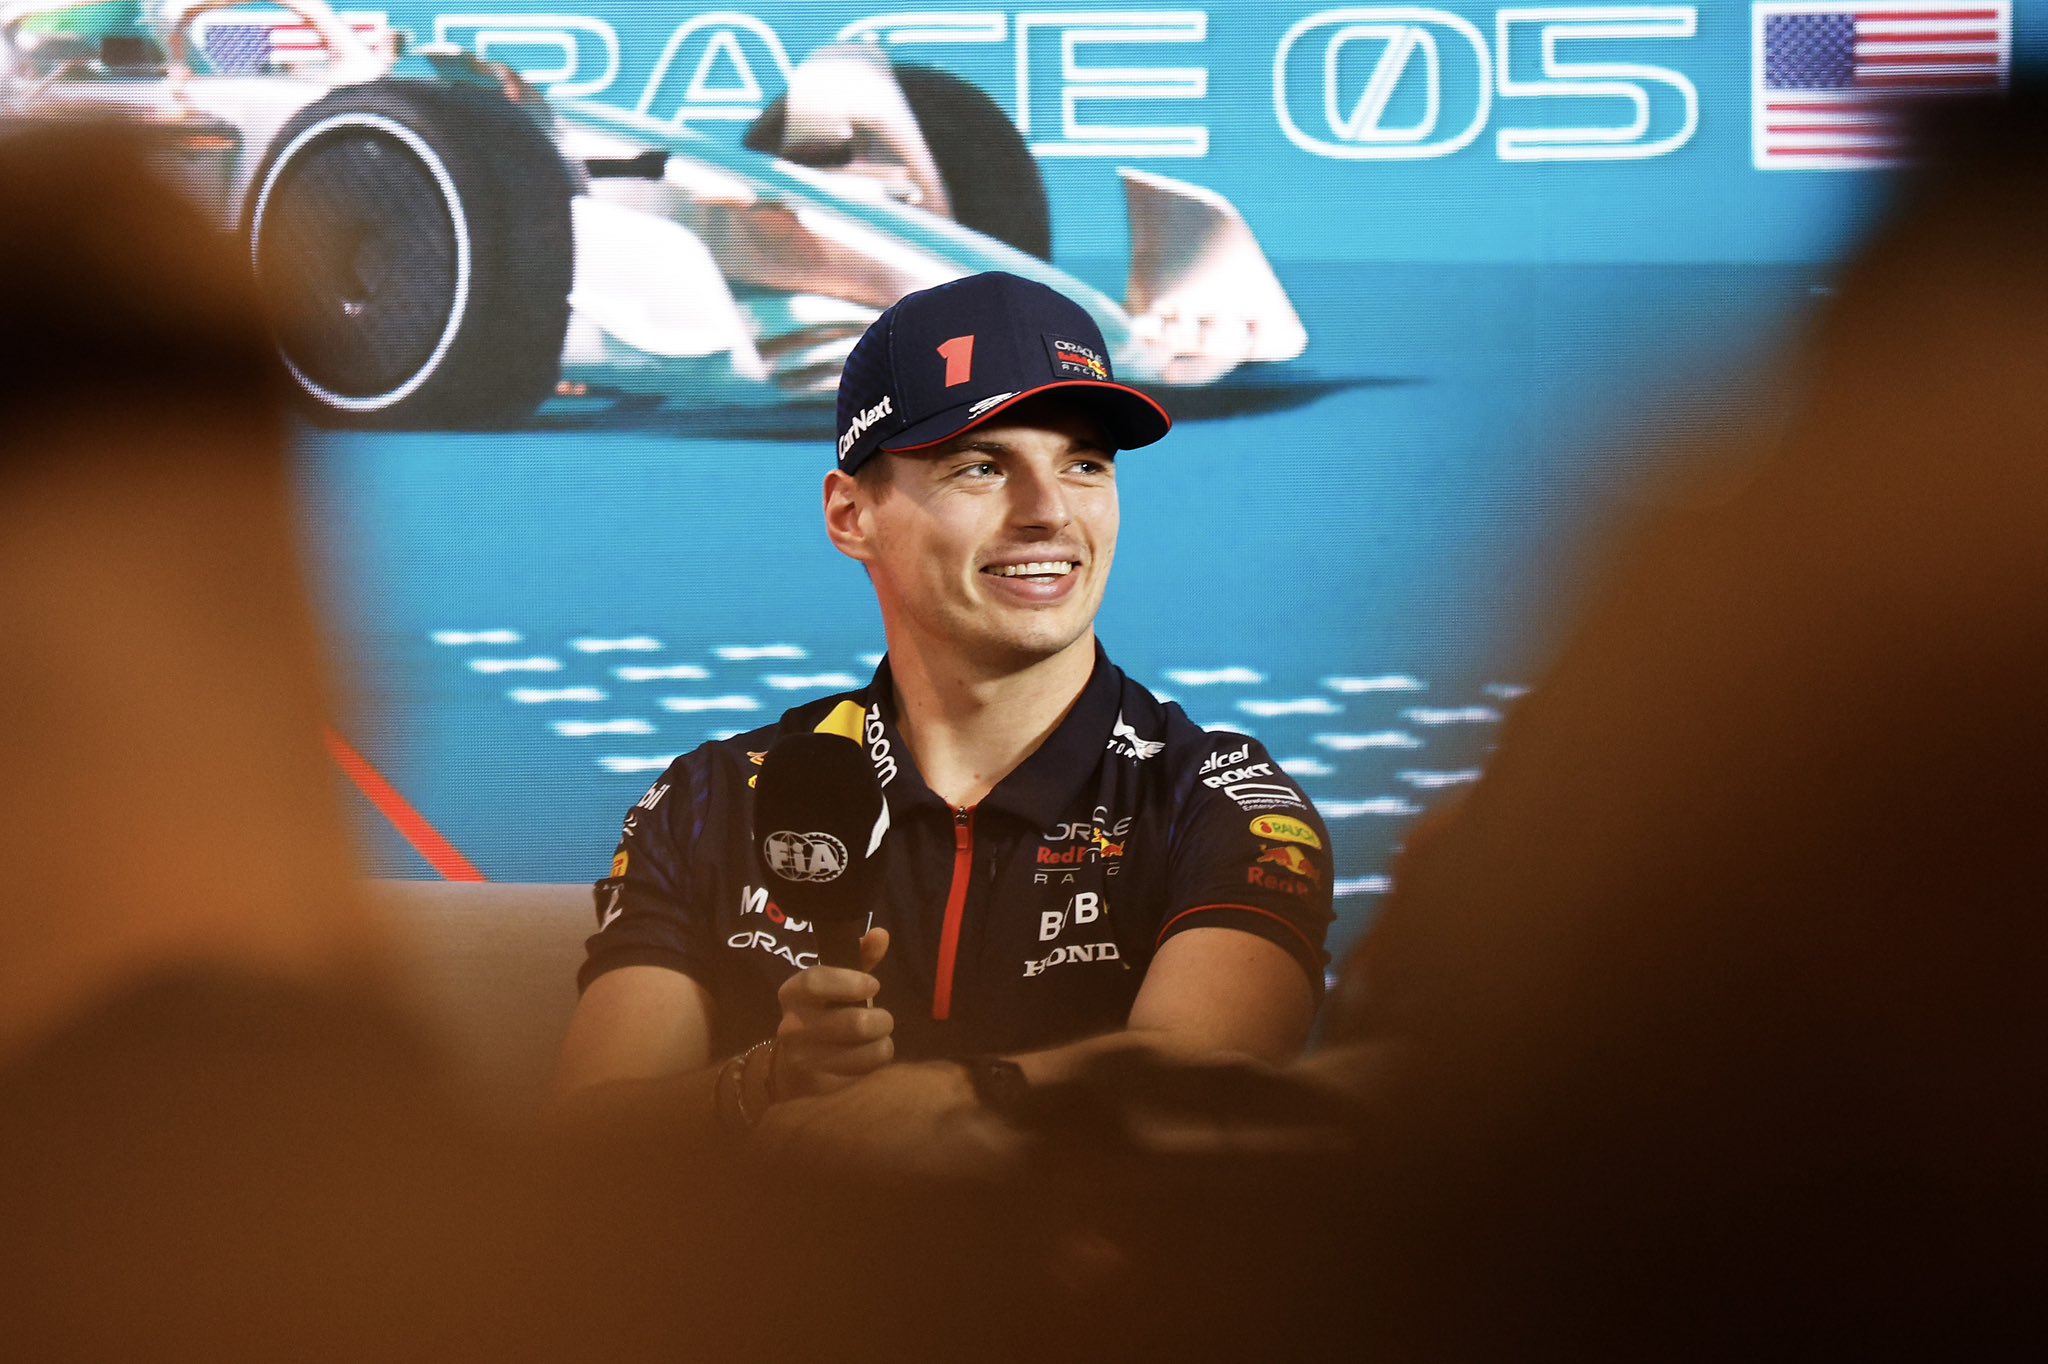 Max Verstappen at the 2023 Miami Grand Prix (Image Credit: @Max33Verstappen on Twitter)